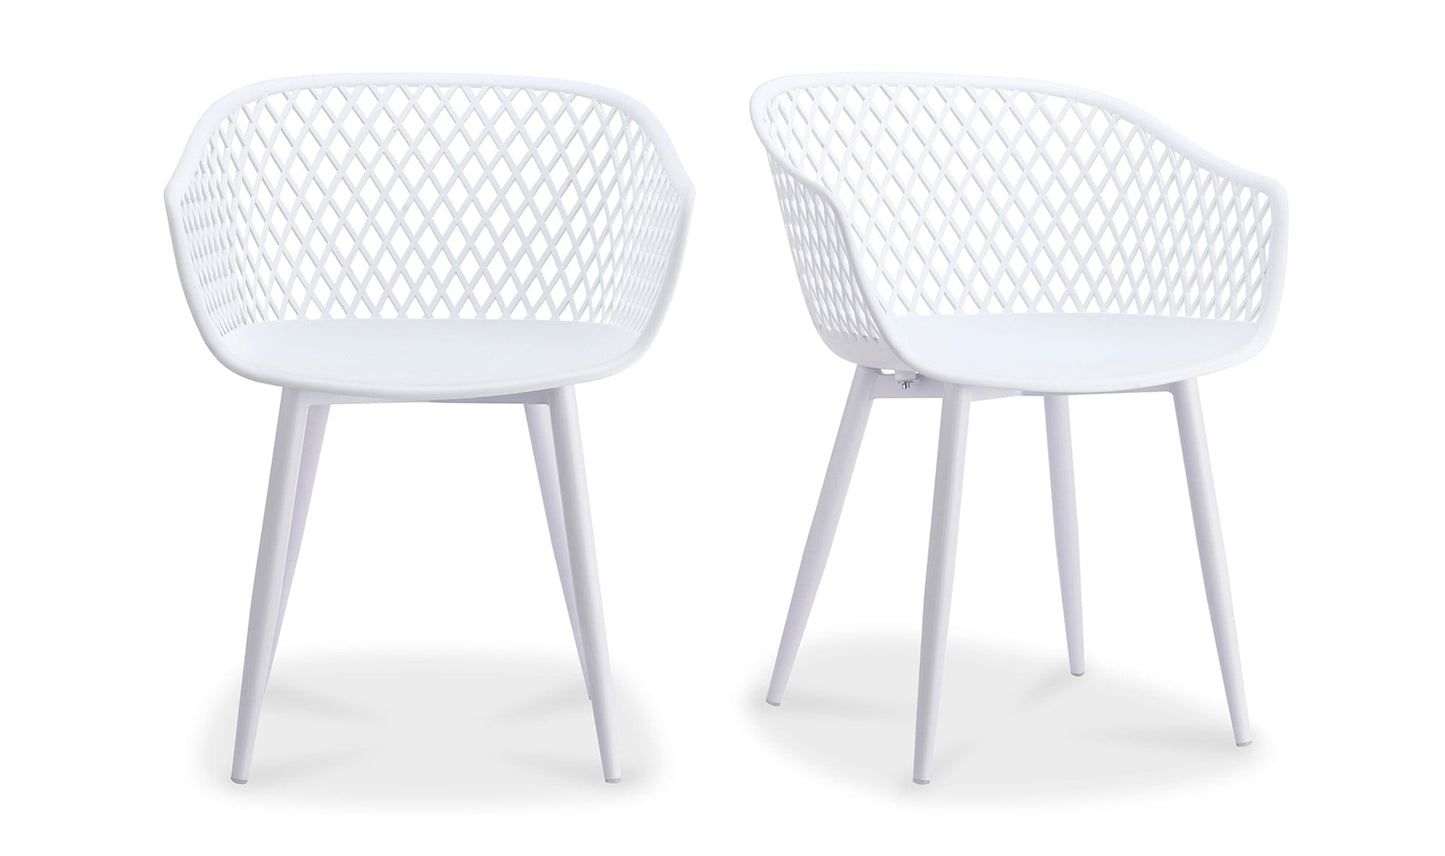 Moe's White PIAZZA OUTDOOR CHAIR - SET OF TWO